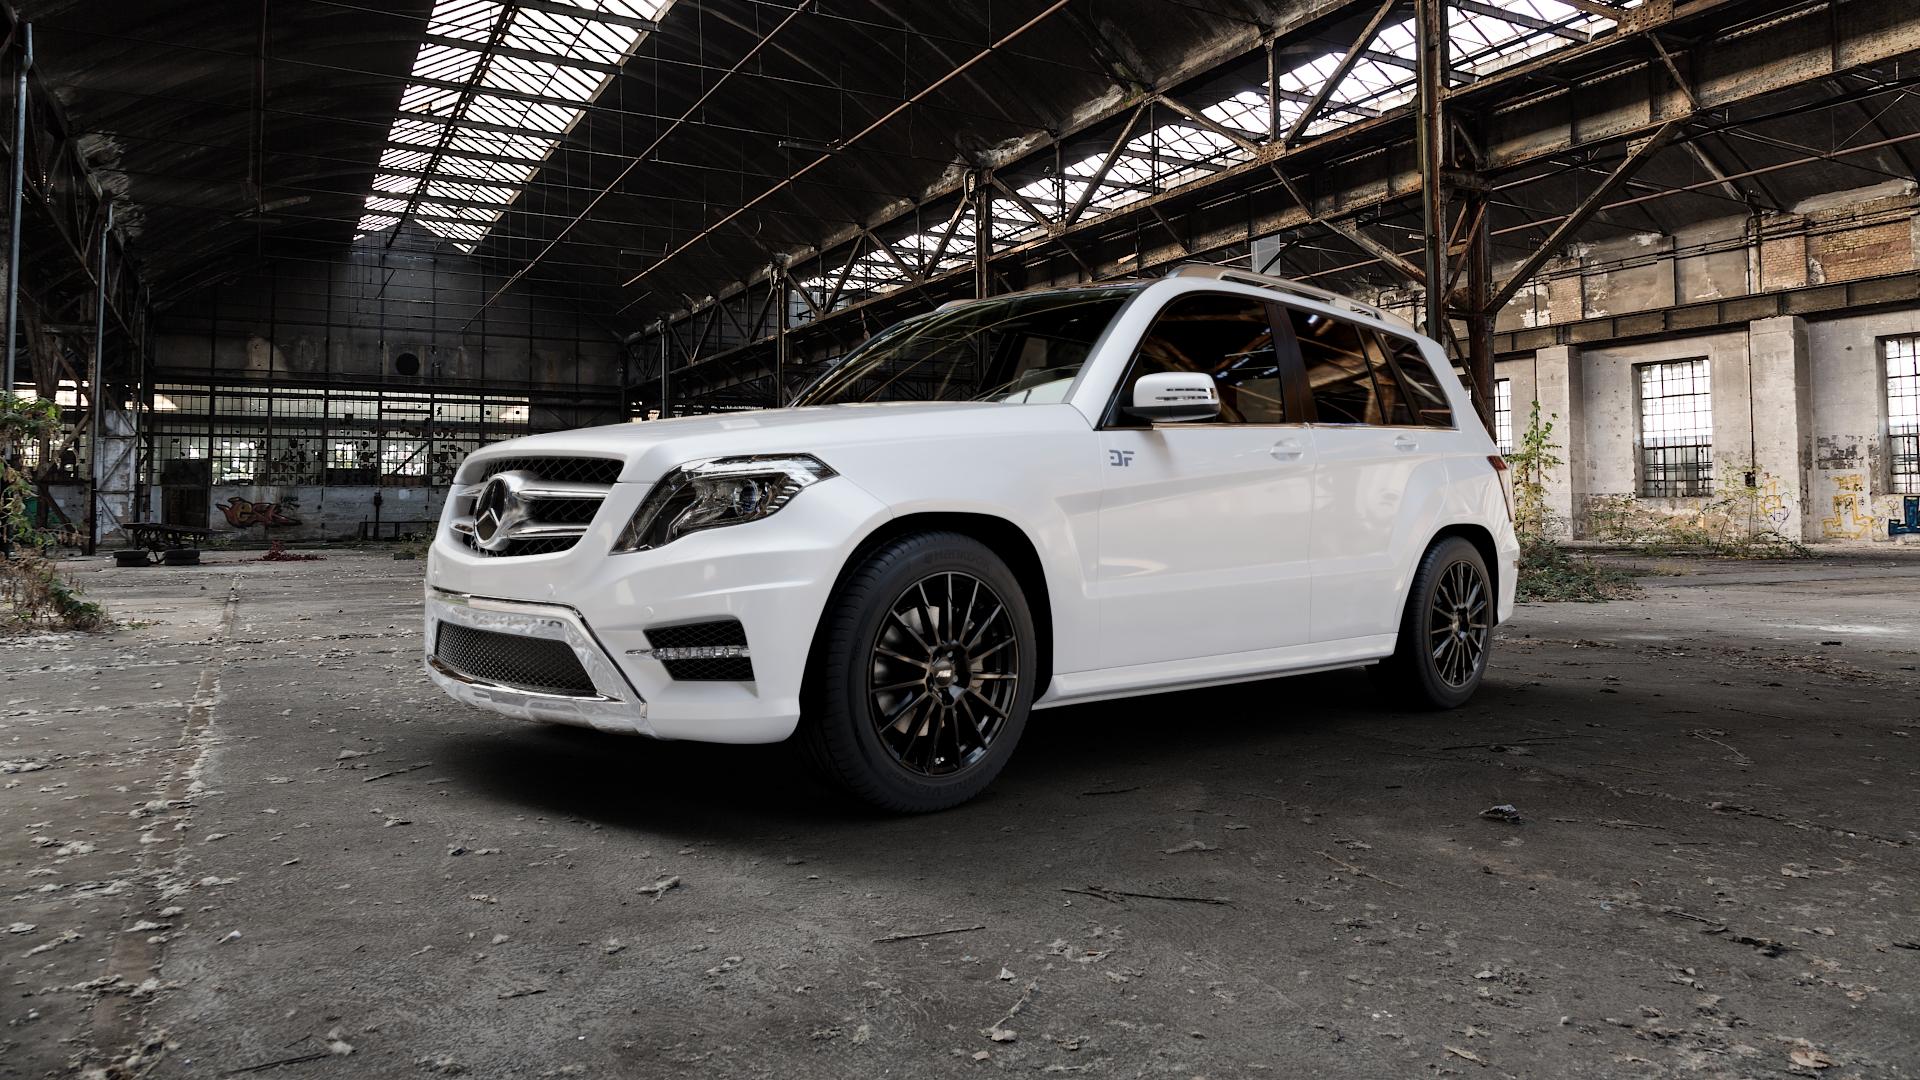 Mercedes GLK-Class Type X204 Facelift 3,5l GLK 350 4Matic 225kW (306 hp)  Wheels and Tyre Packages